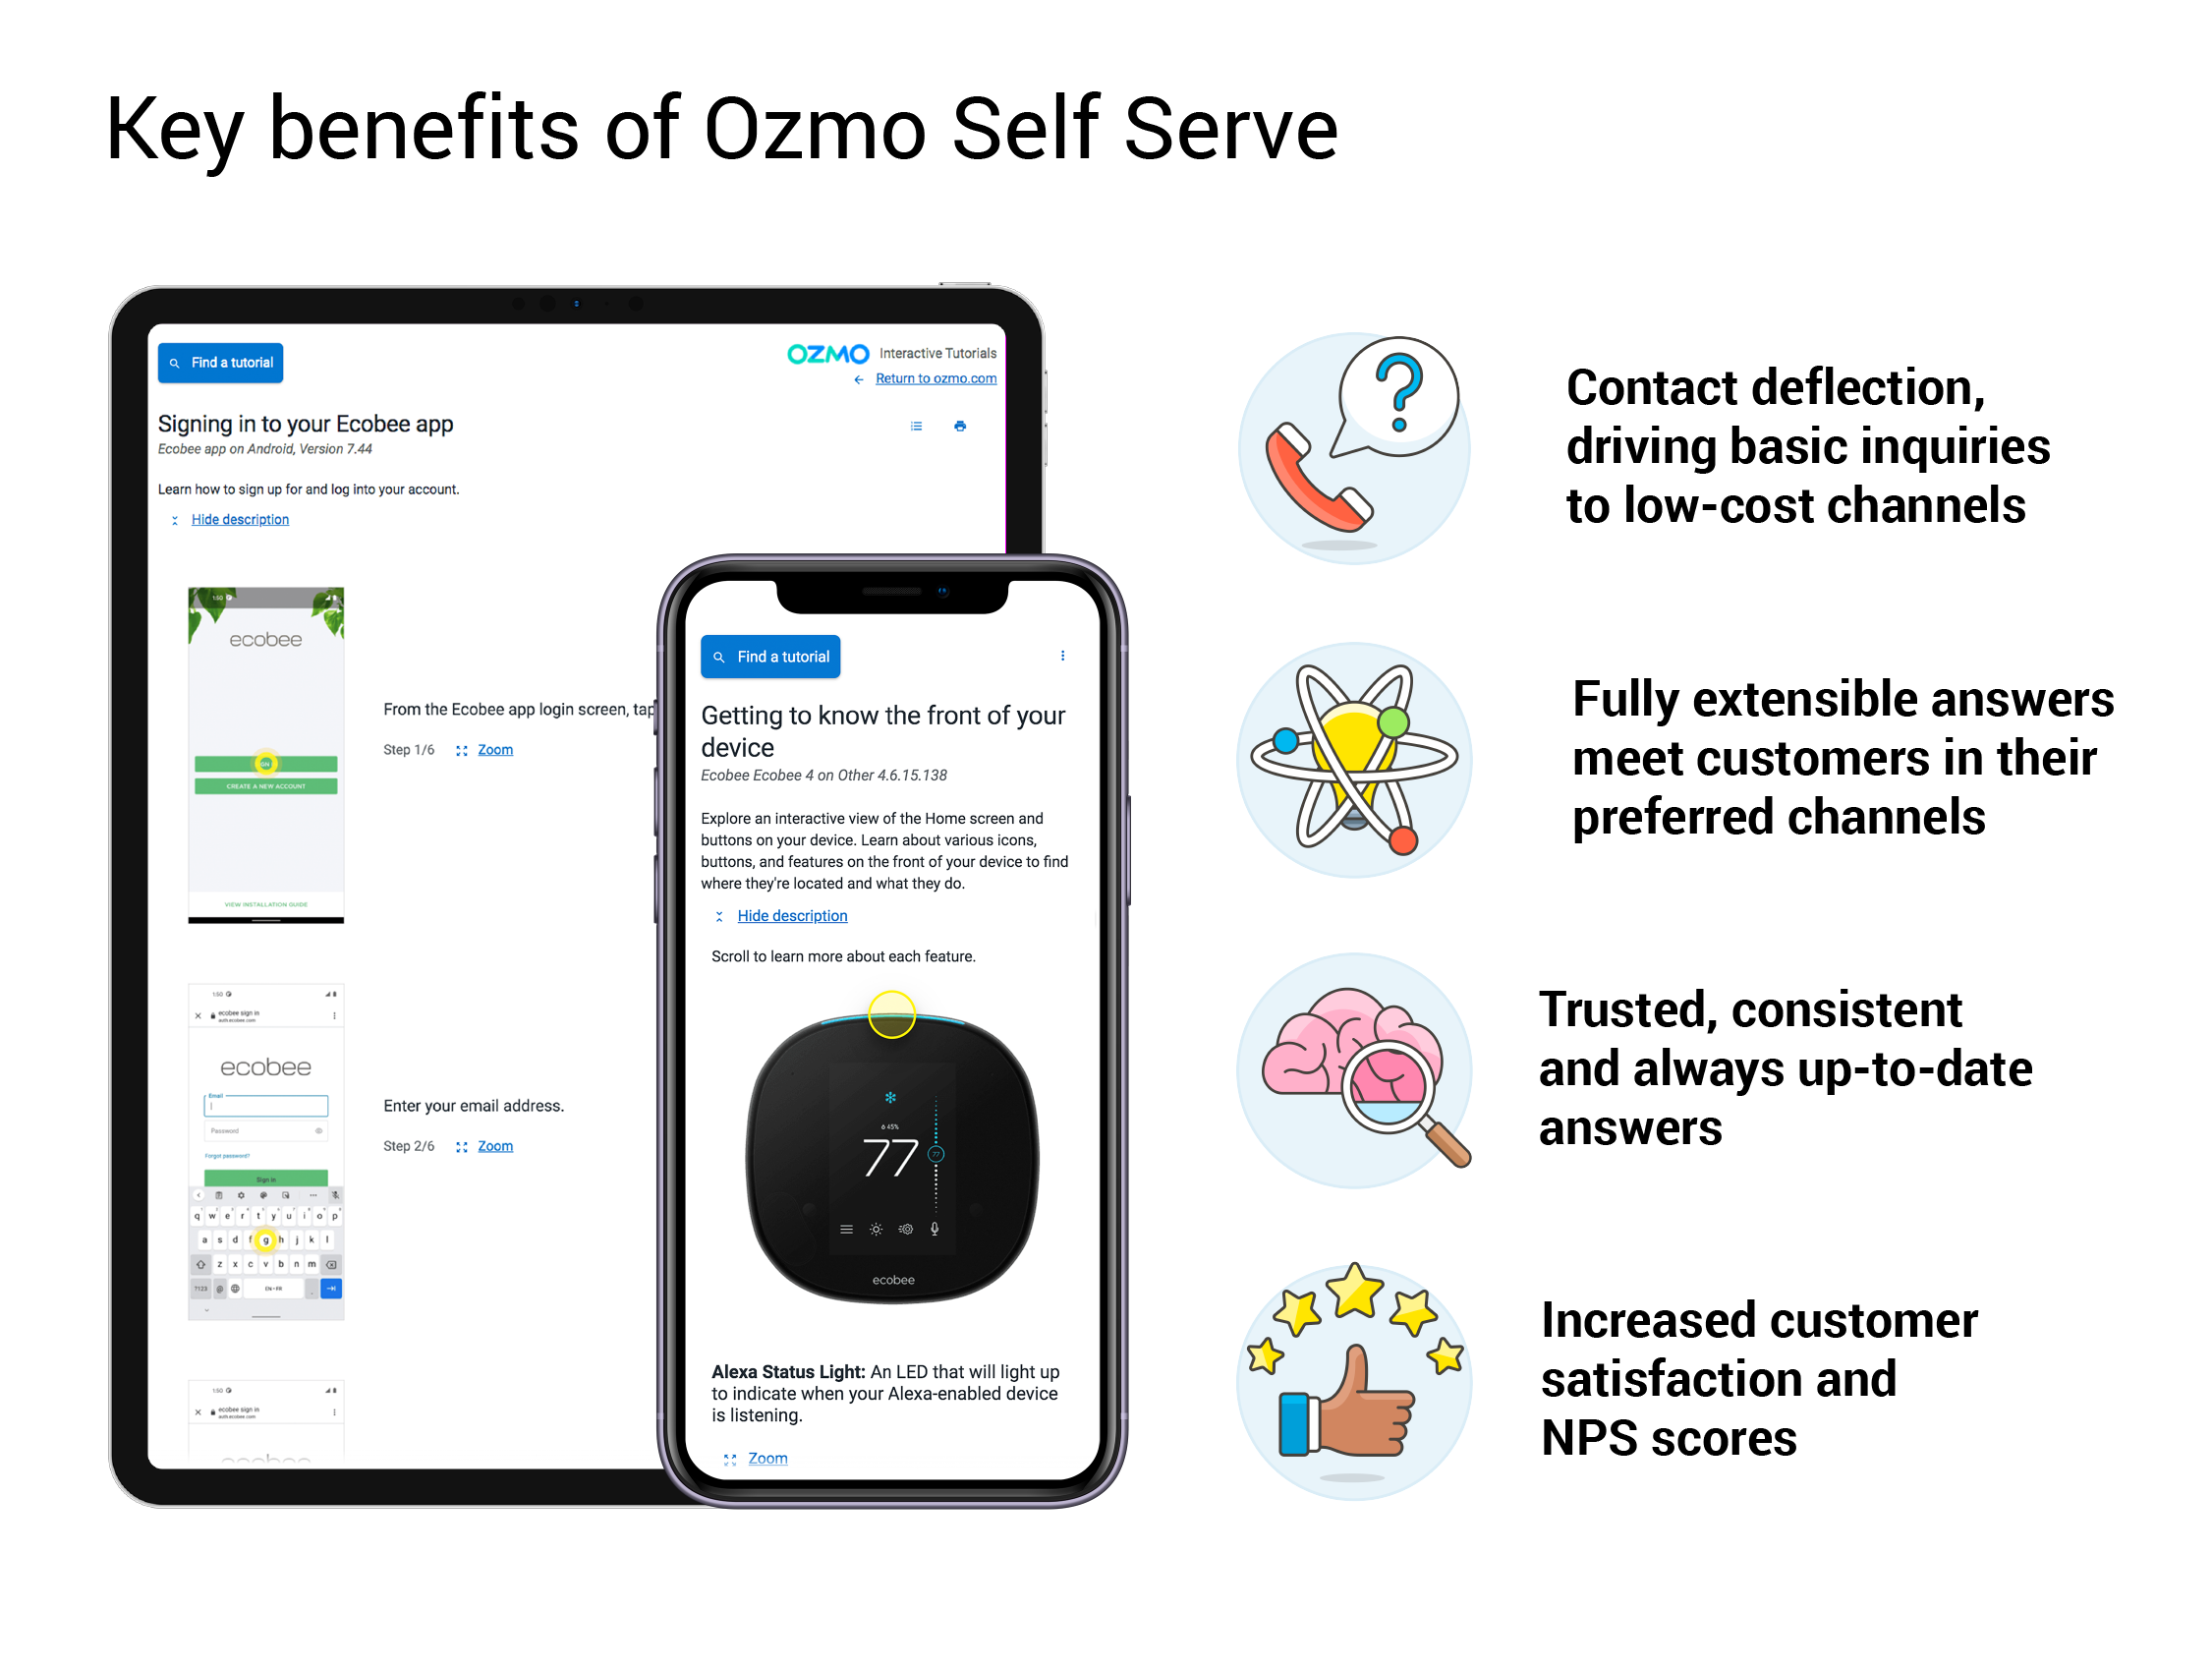 Key benefits of Ozmo's self serve solution include deflecting calls, meeting customers in their preferred channels, keeping a library up-tp-date answers and increasing customer satisfaction and NPS scores.